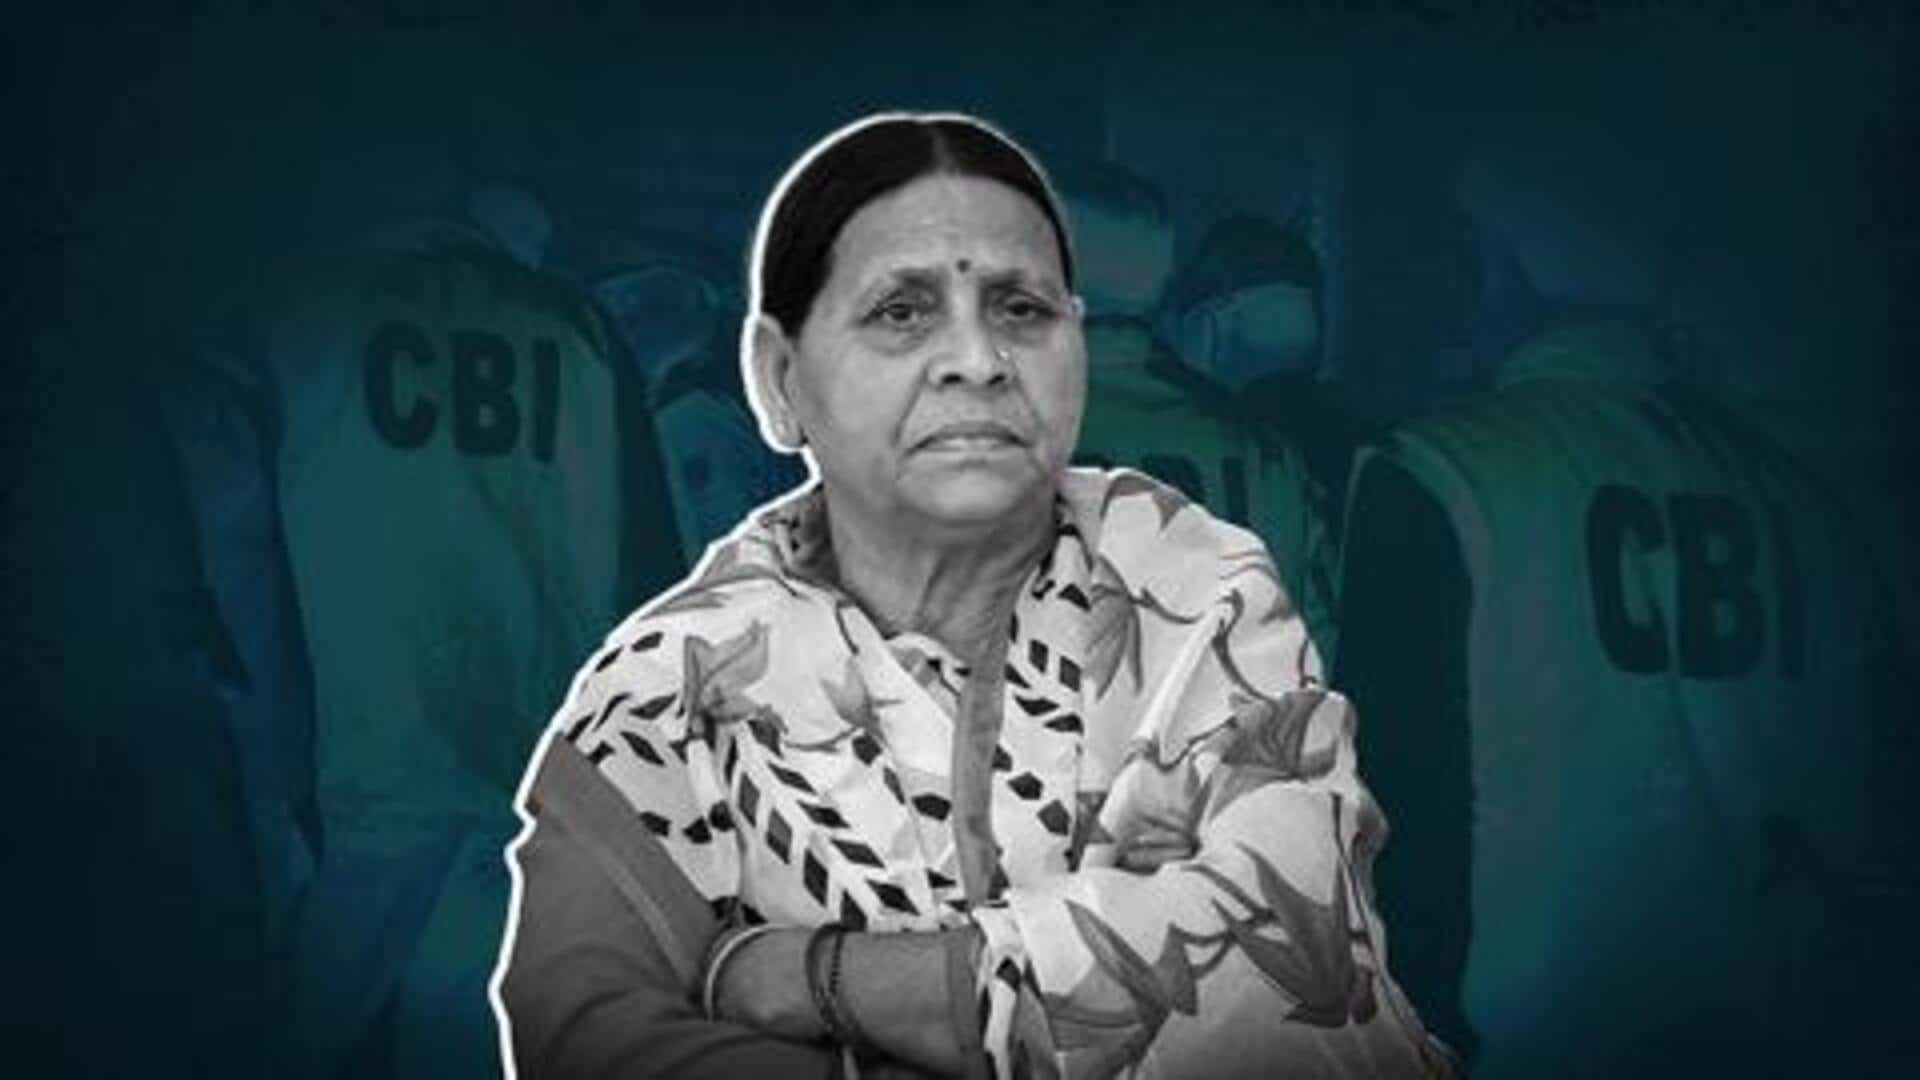 Land-for-jobs scam: ED chargesheet names Rabri Devi, daughter Misa Bharti